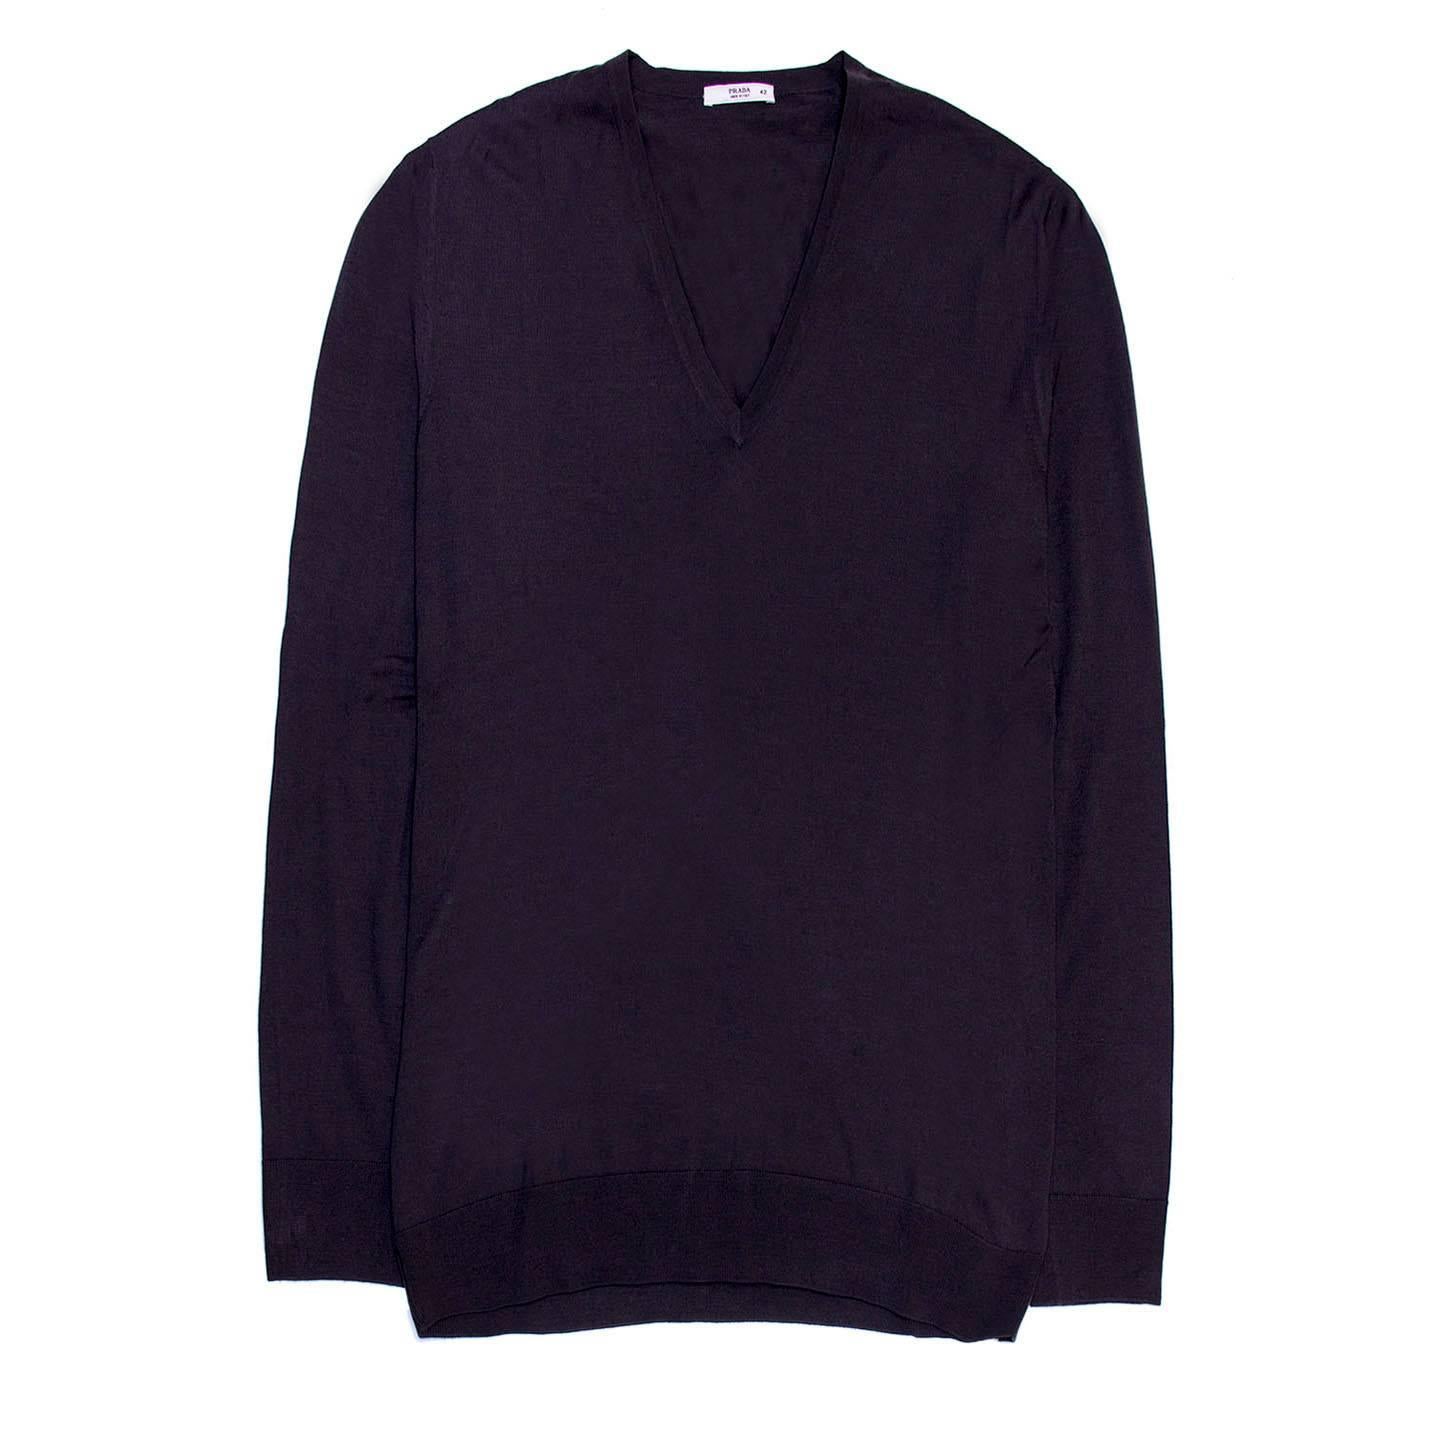 Prada purple blue thin and soft wool deep V-neck pullover knit.

Size  42 Italian sizing

Condition  Excellent: never worn